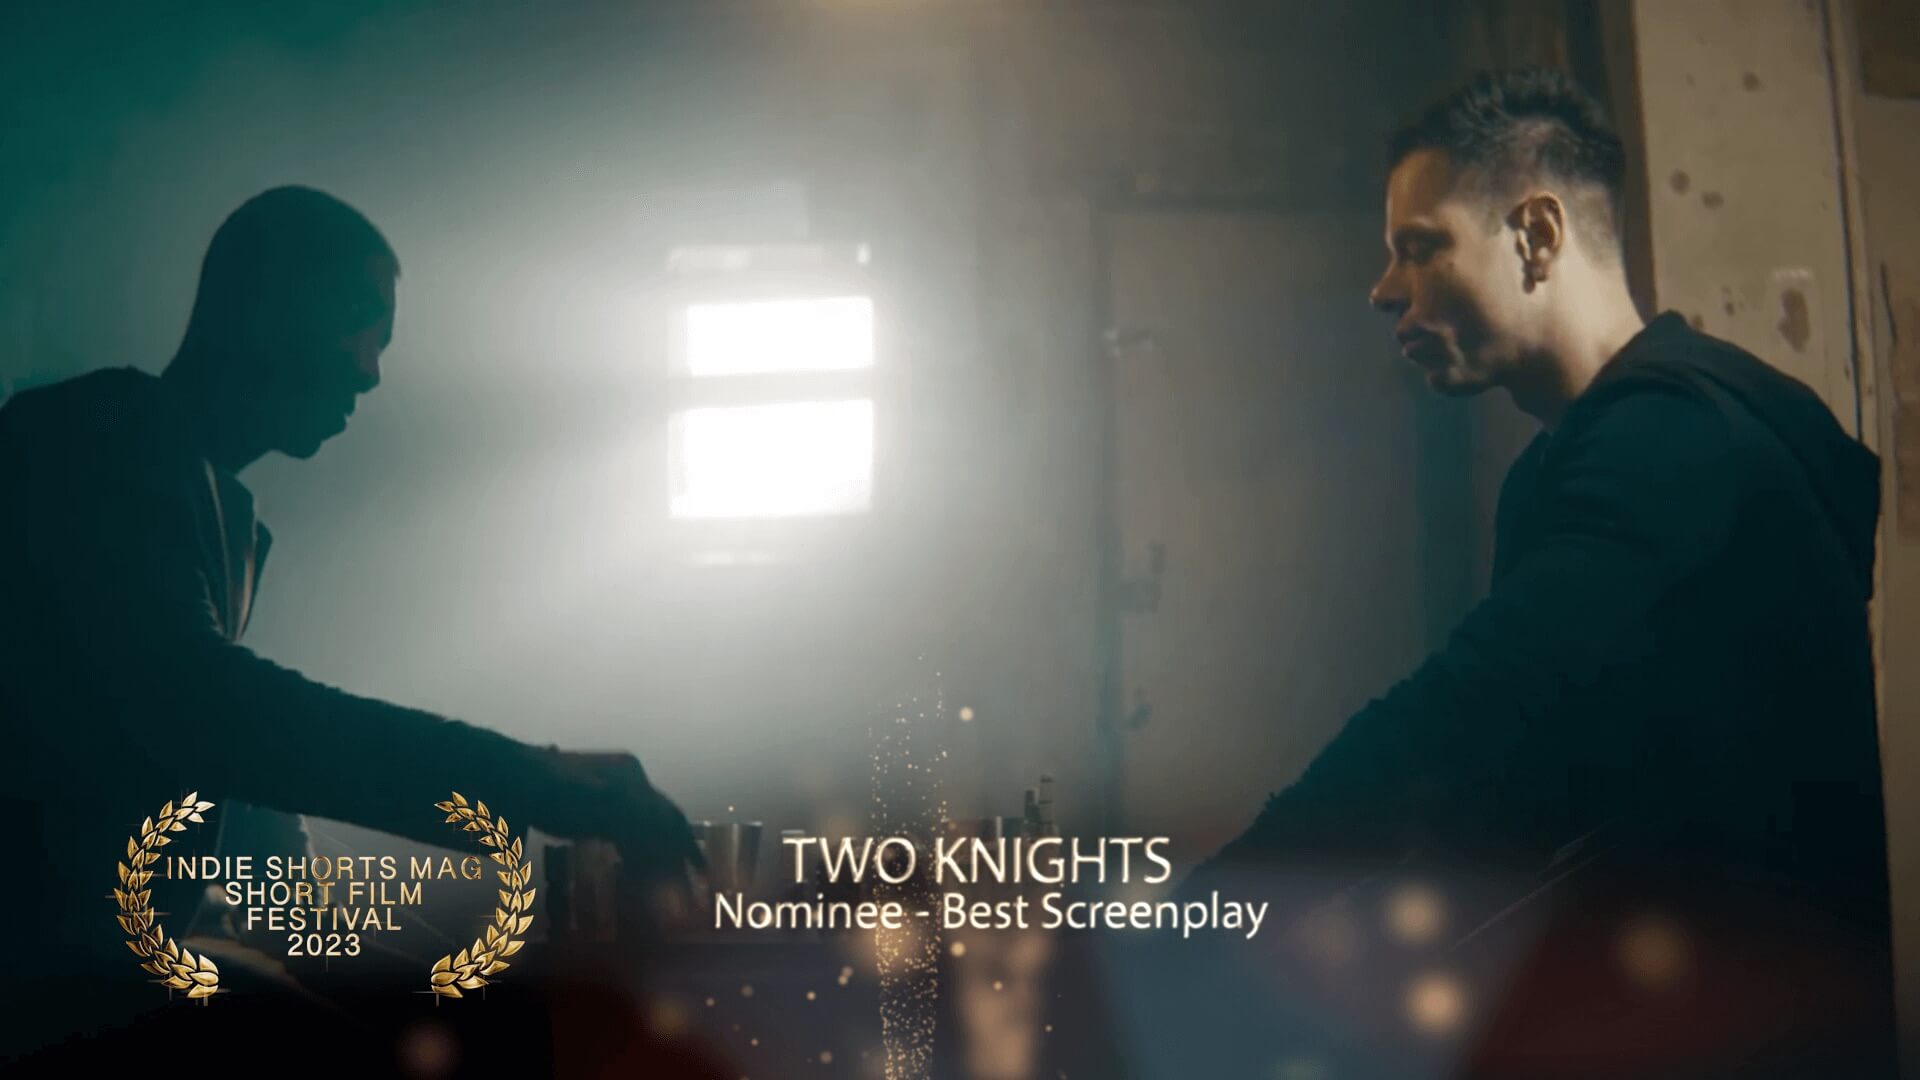 Indie Shorts Mag Short Film Festival - Best Screenplay - Nominee - Two Knights